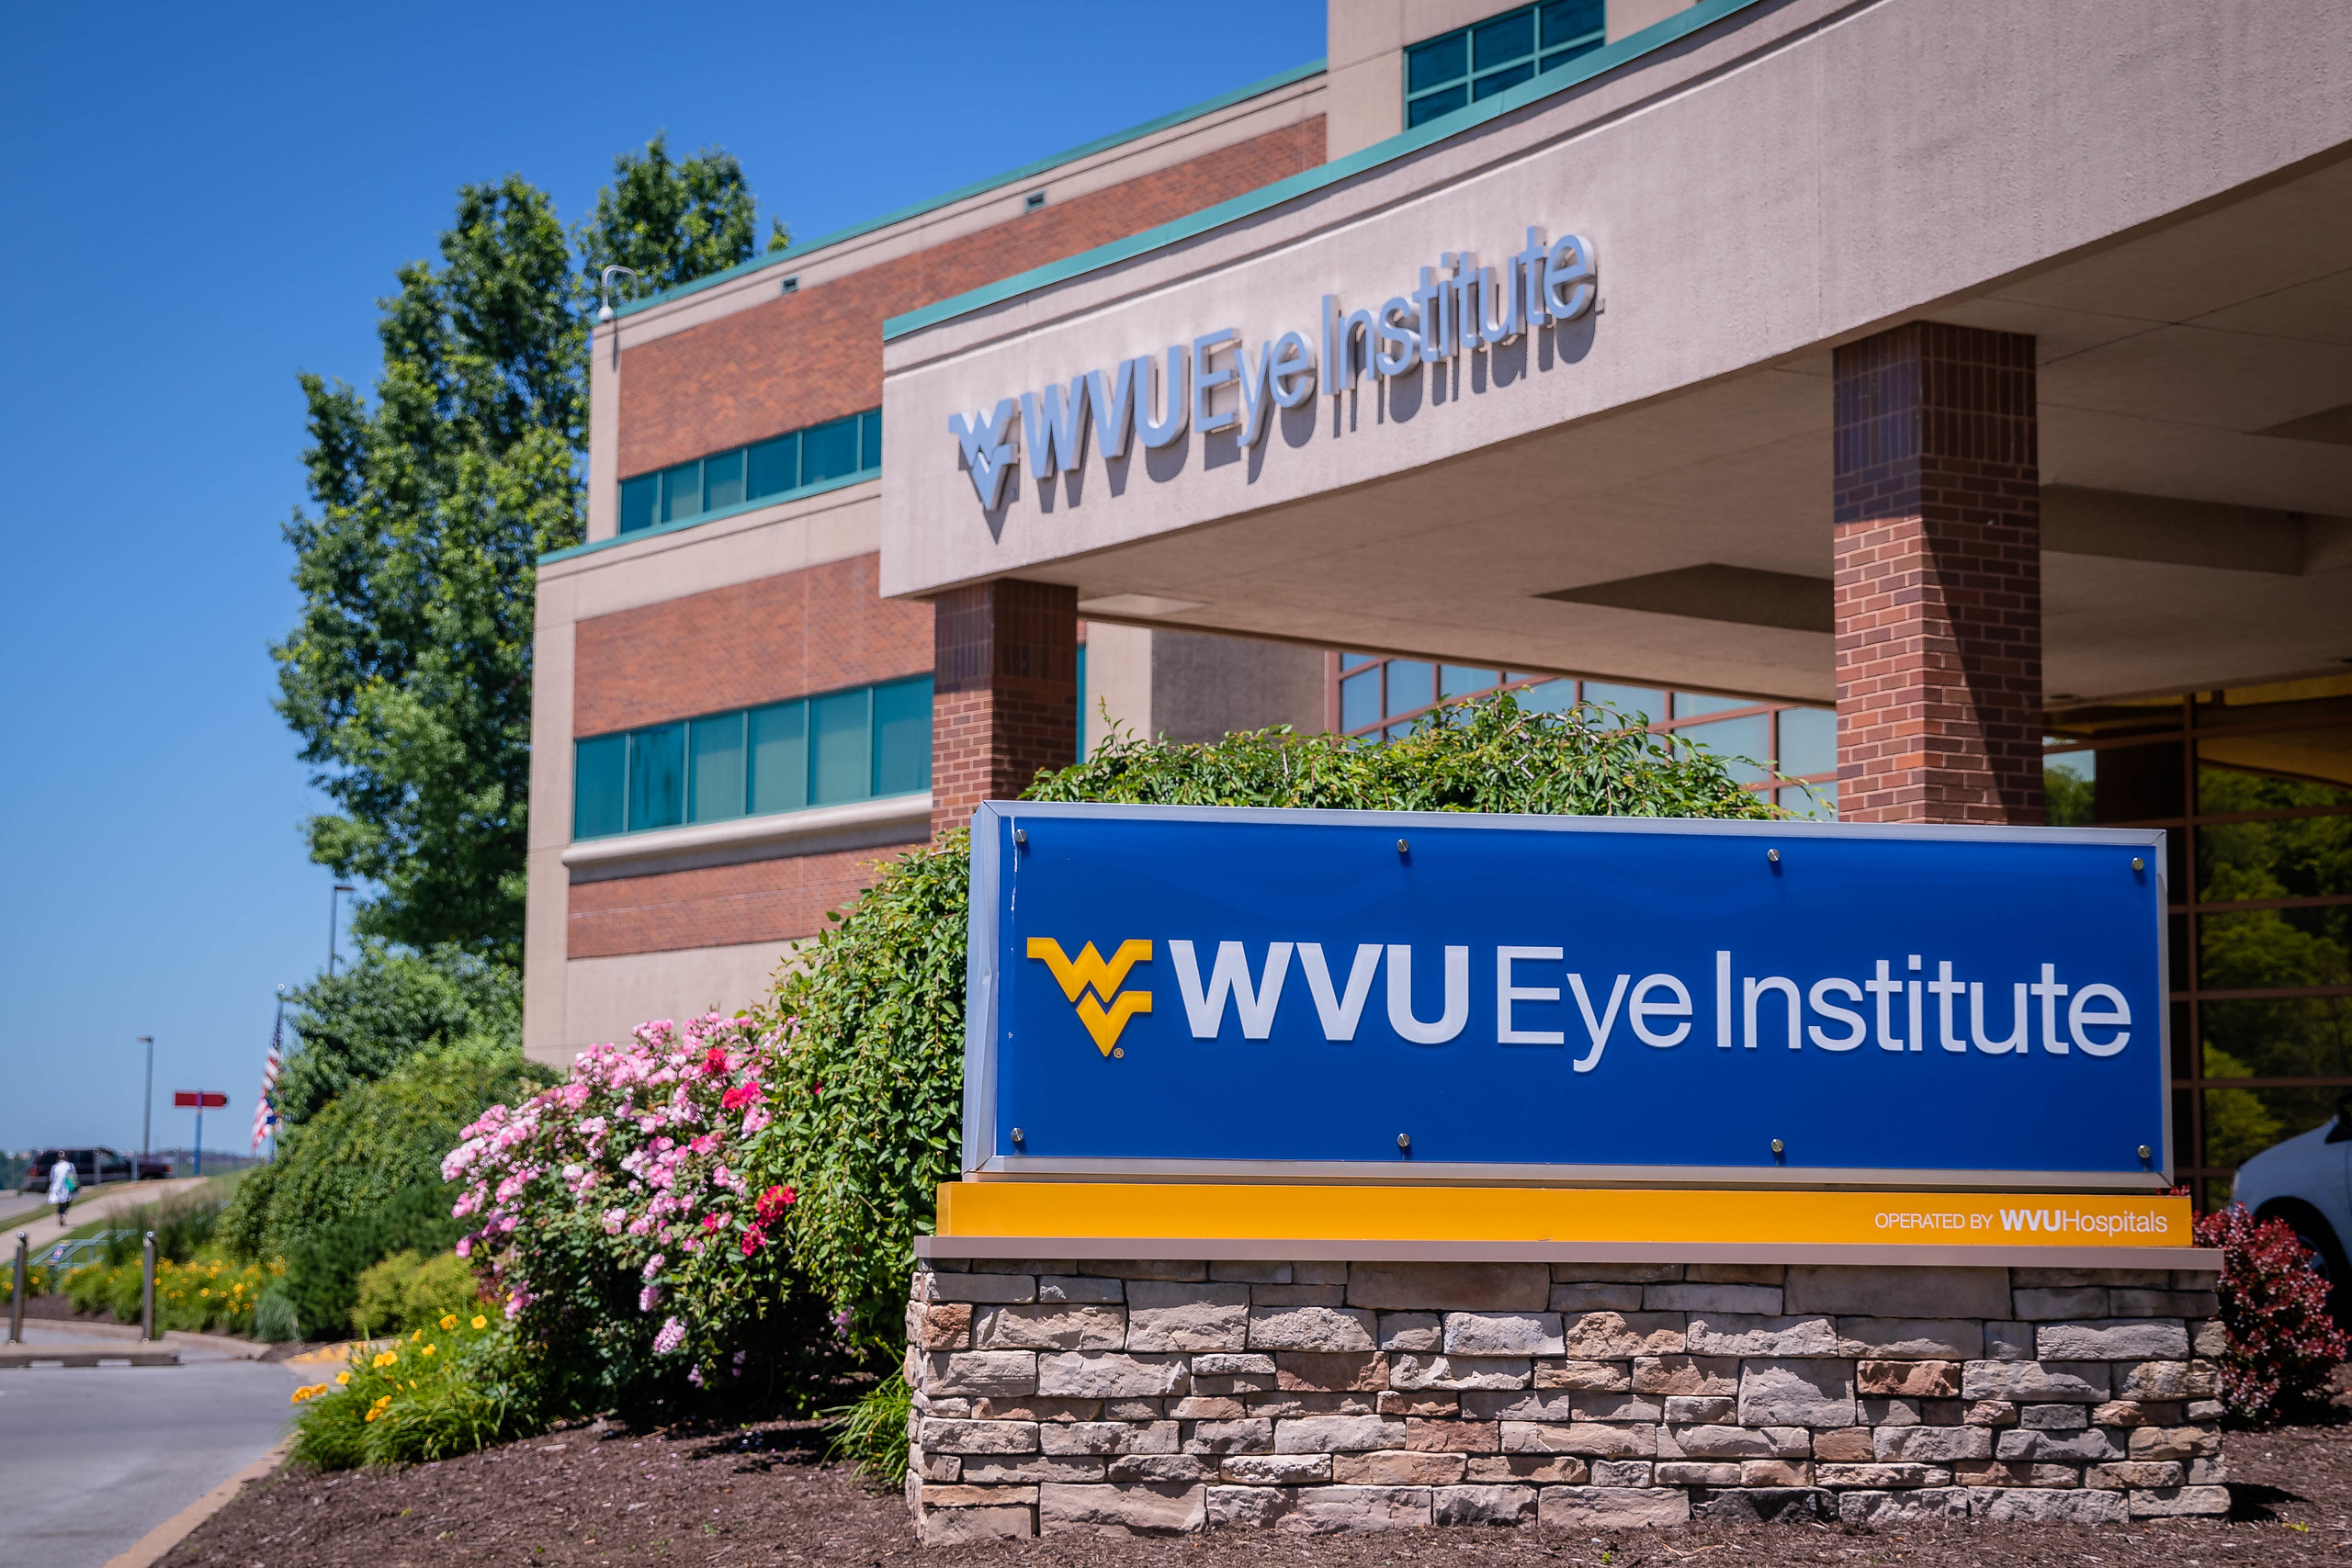 Exterior of the WVU Eye Institute